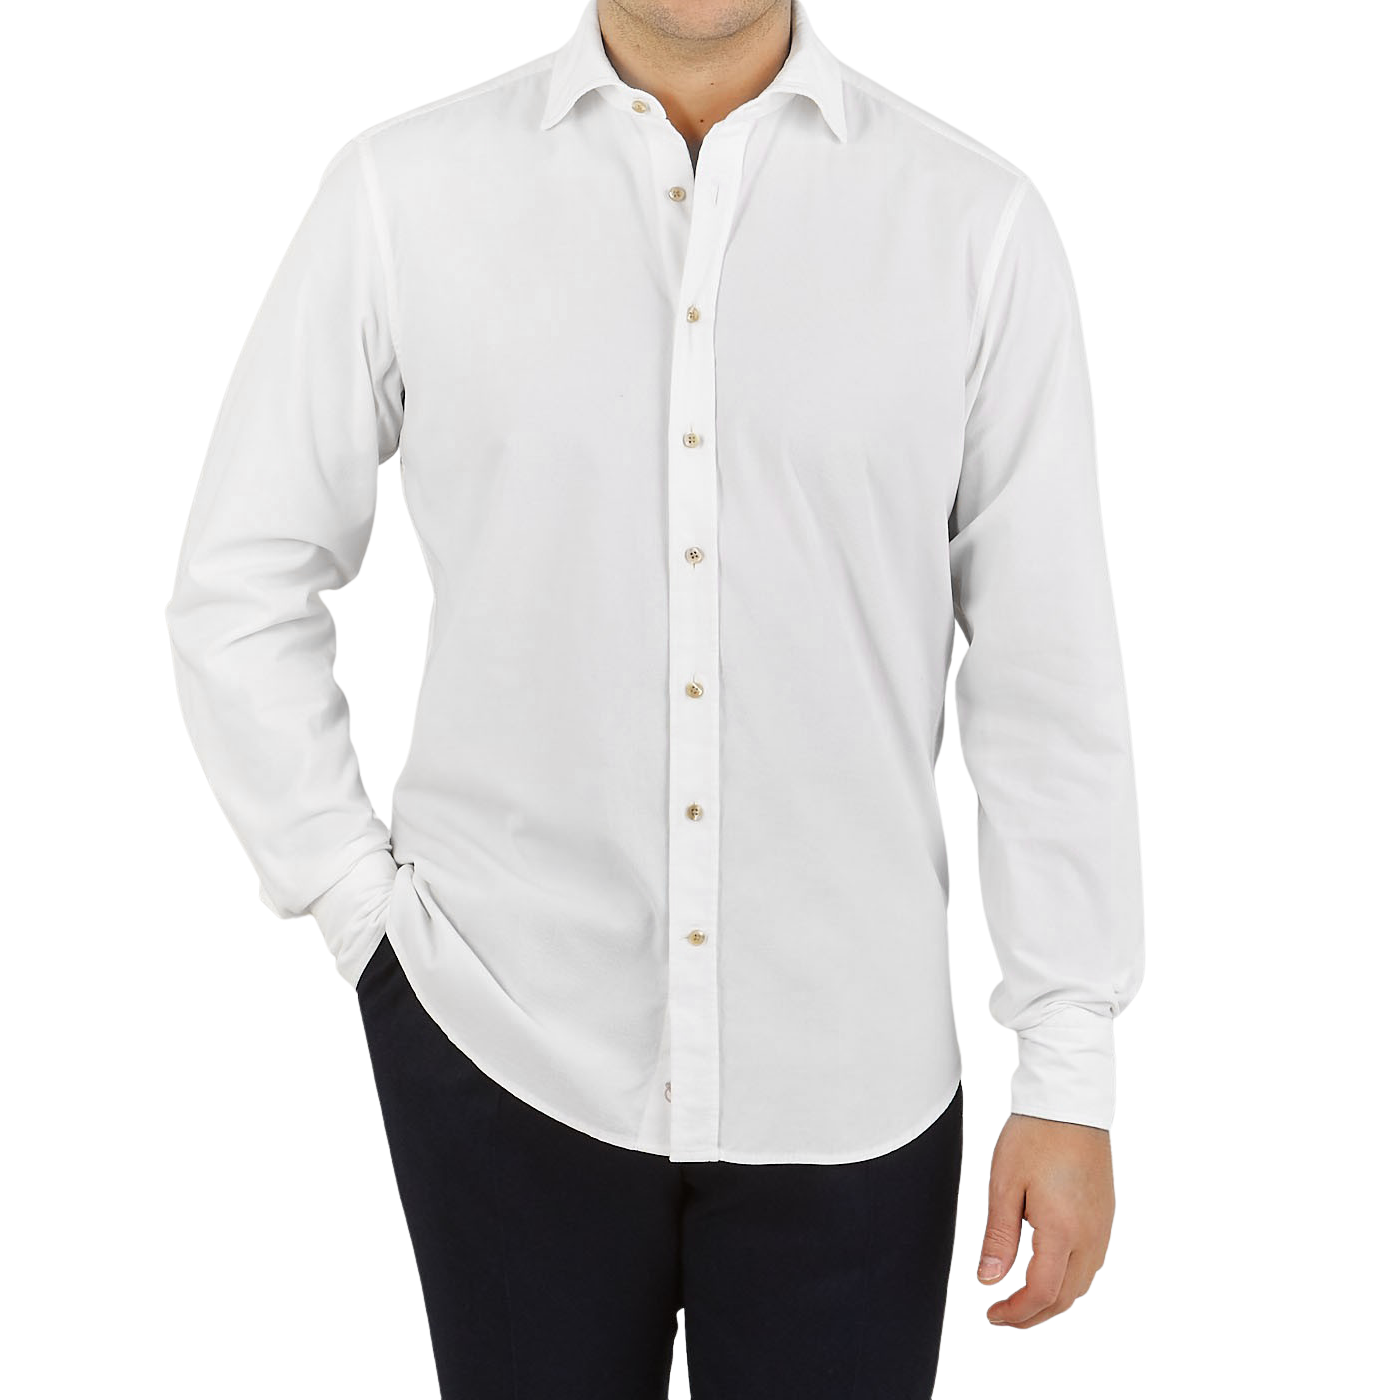 Stenströms White Cotton Corduroy Fitted Body Shirt Front